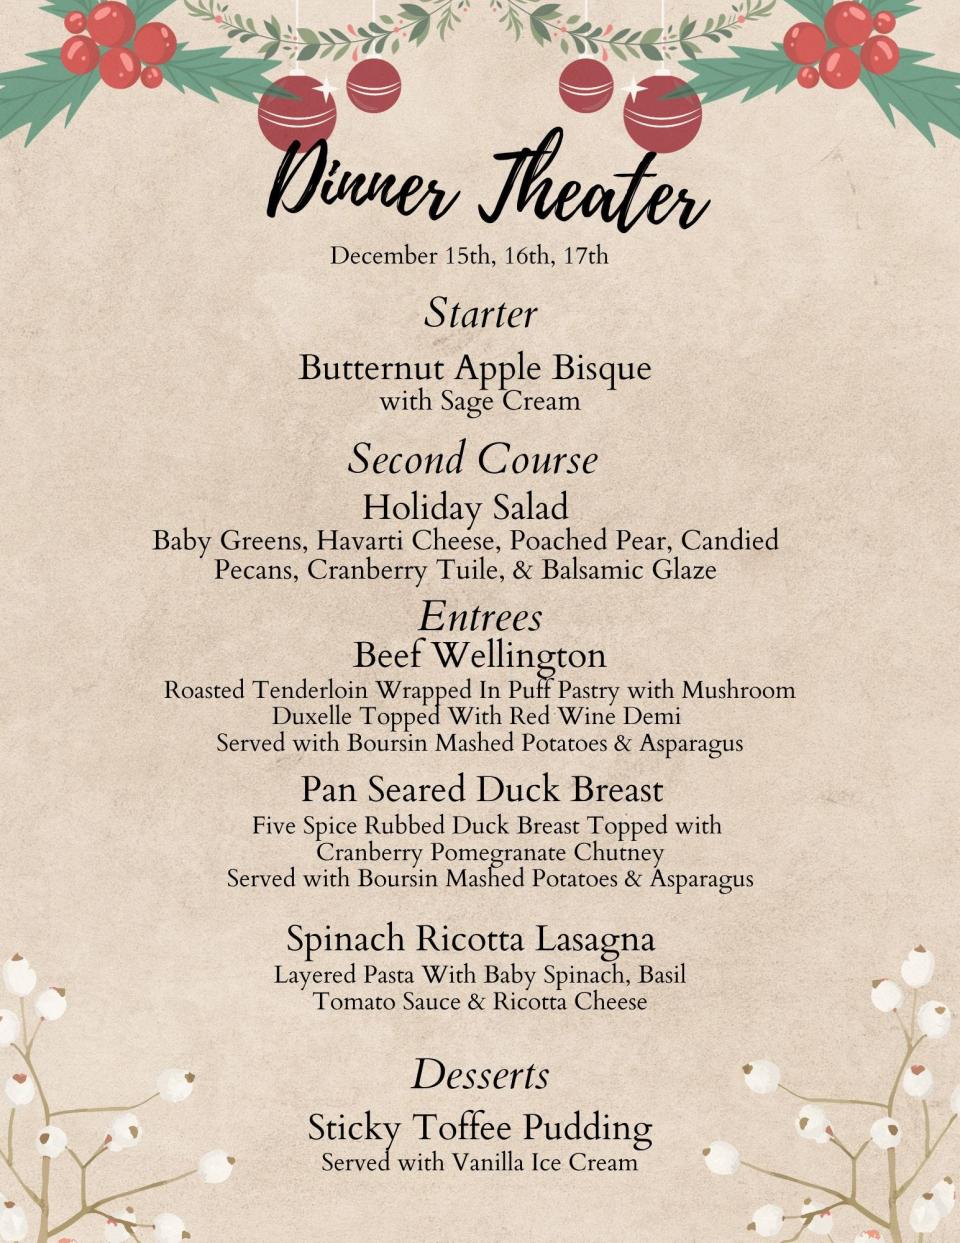 The English-inspired dinner menu for Upper Cape Technical Regional High School's "A Christmas Carol" dinner theater show created by Chef Joe Ellia.